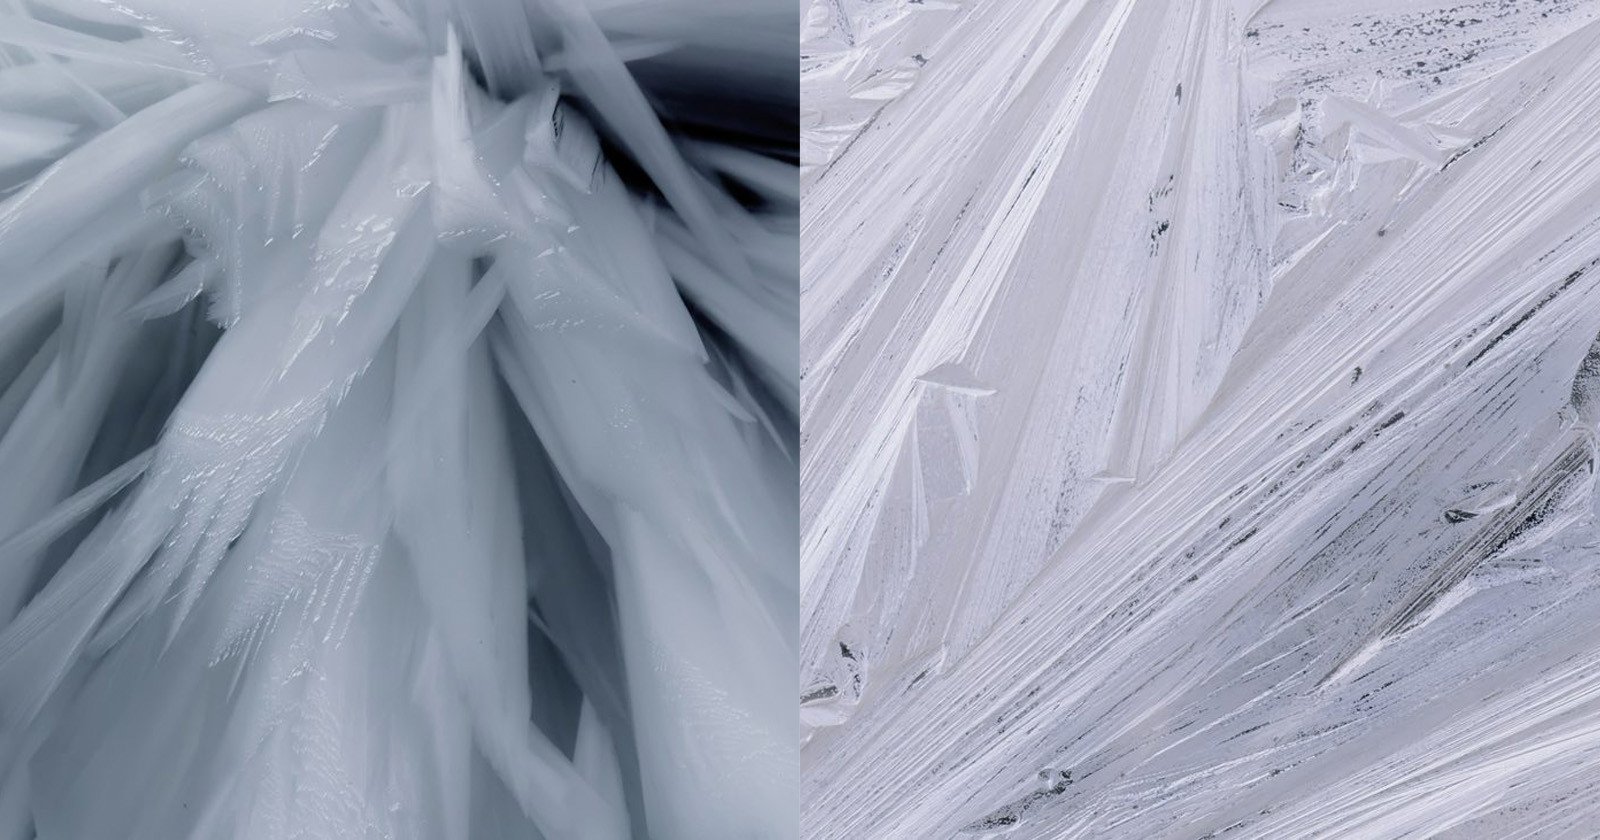 Experimental Film Captures the Beauty of Crystallization in 8K